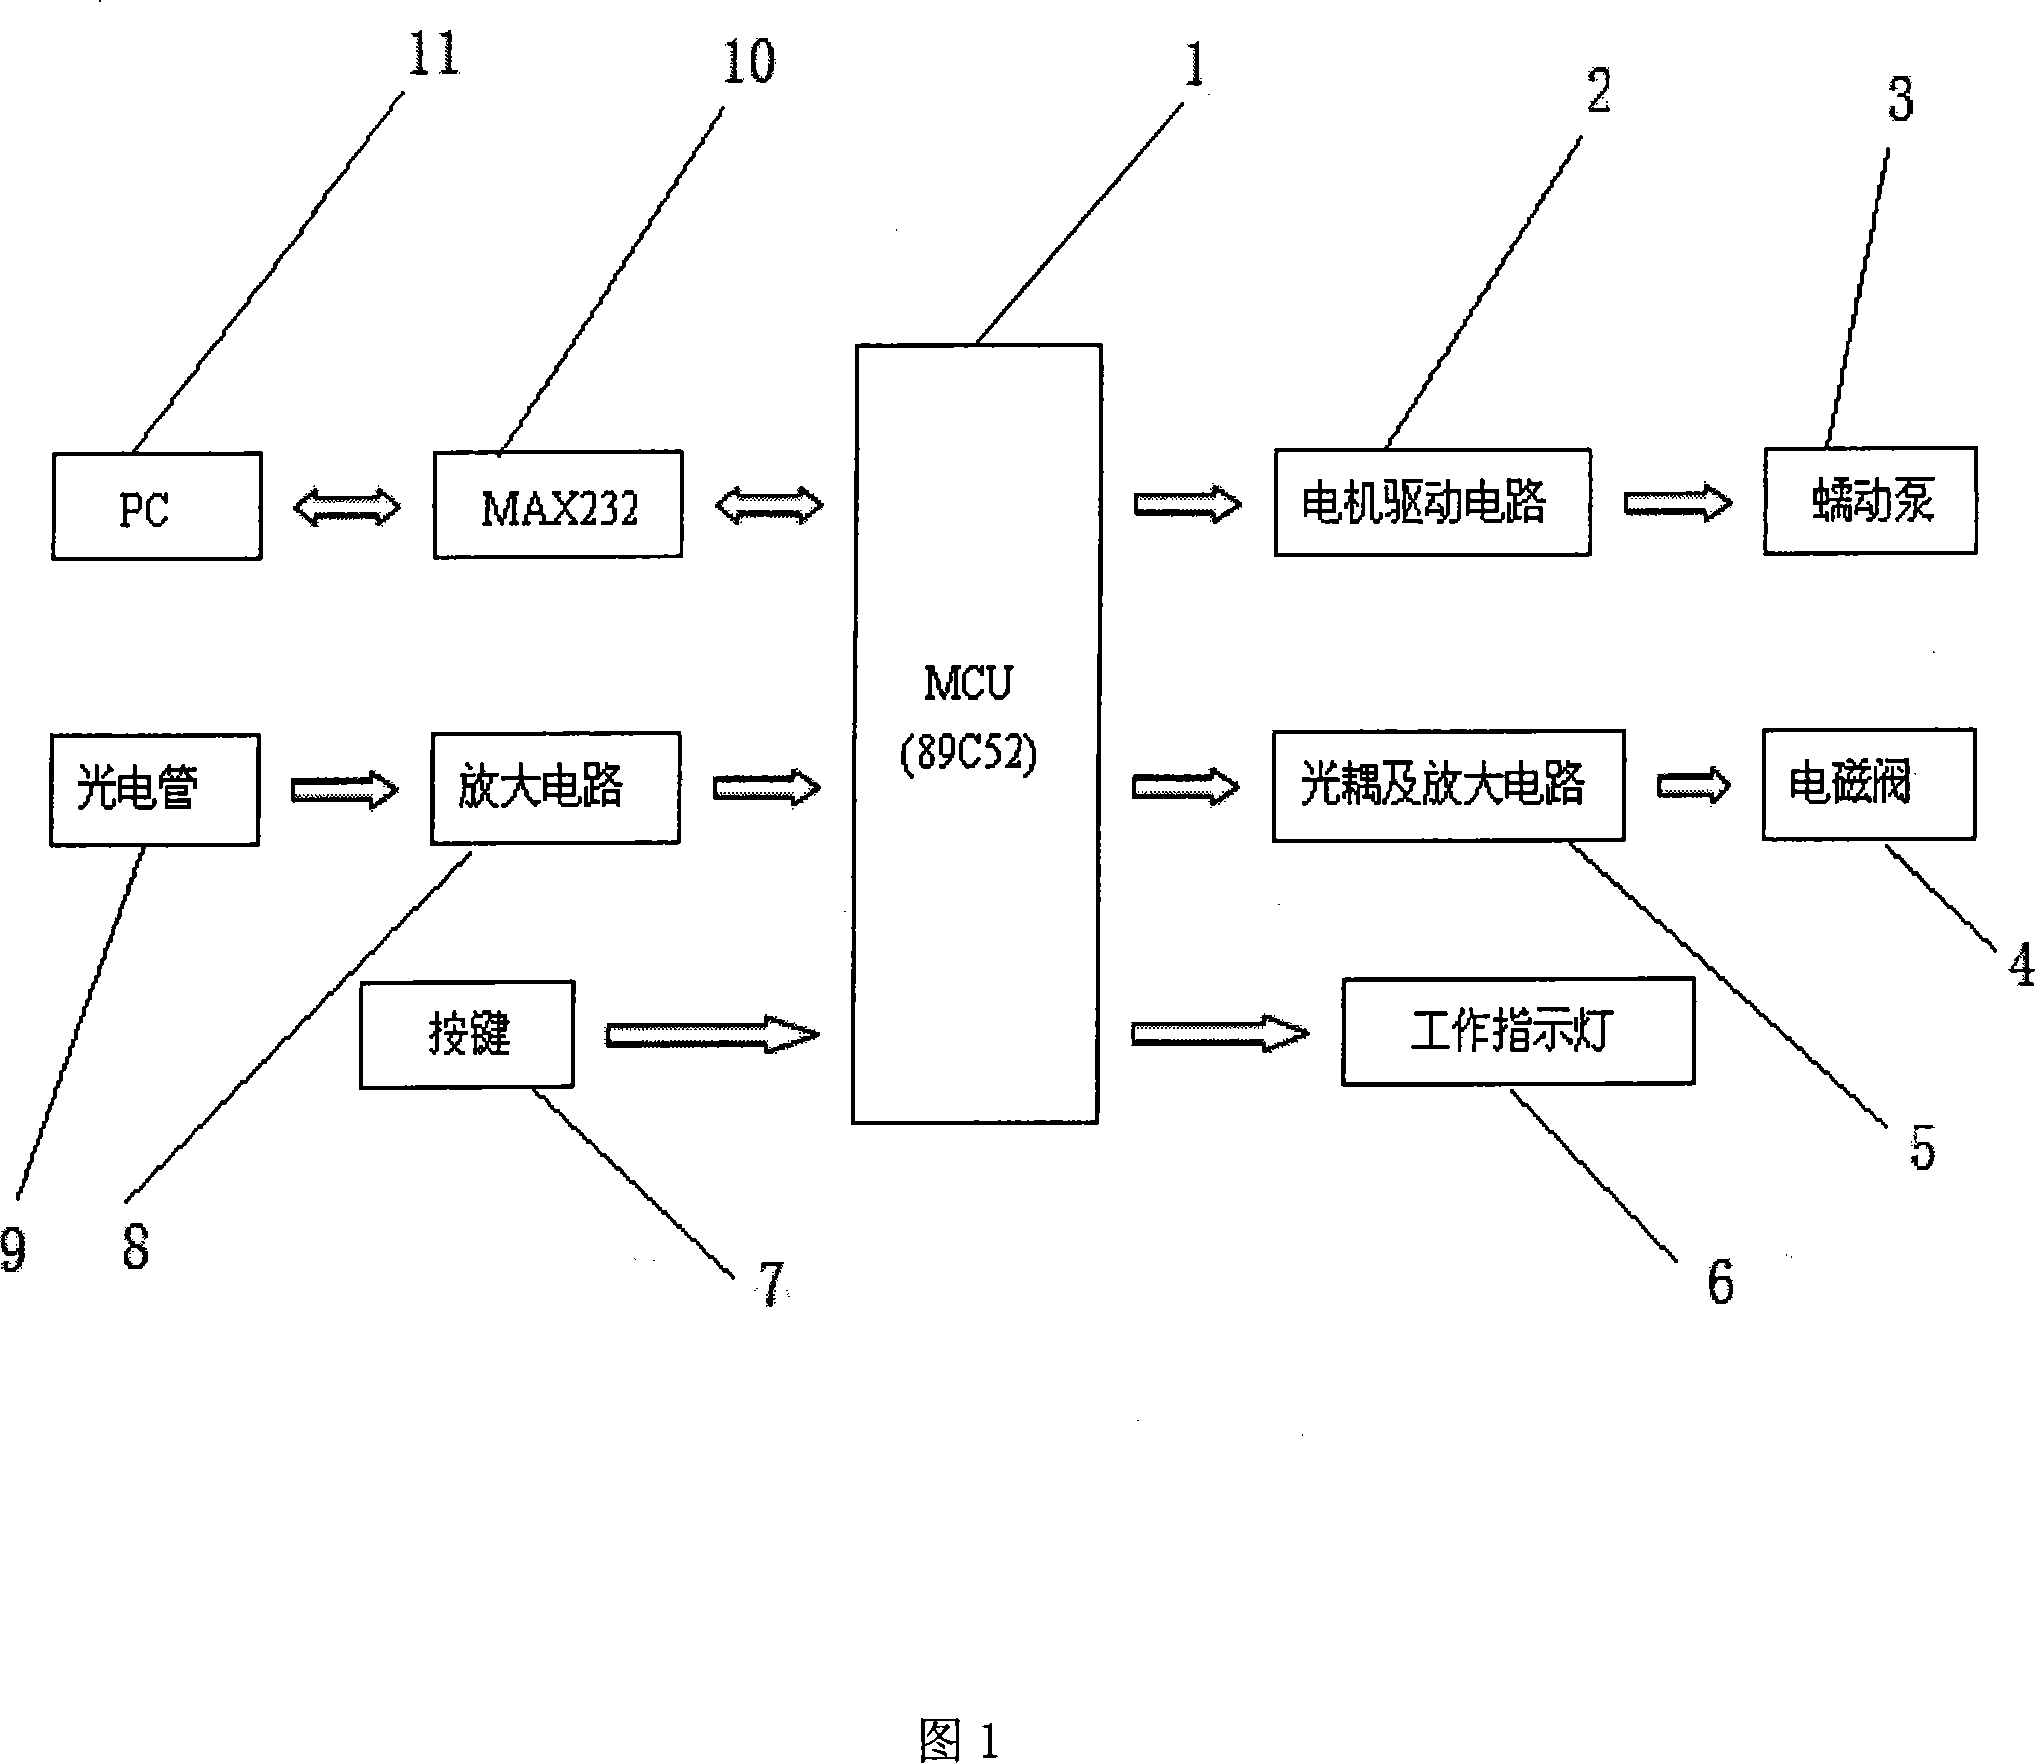 Full-automatic general analyzer control circuit